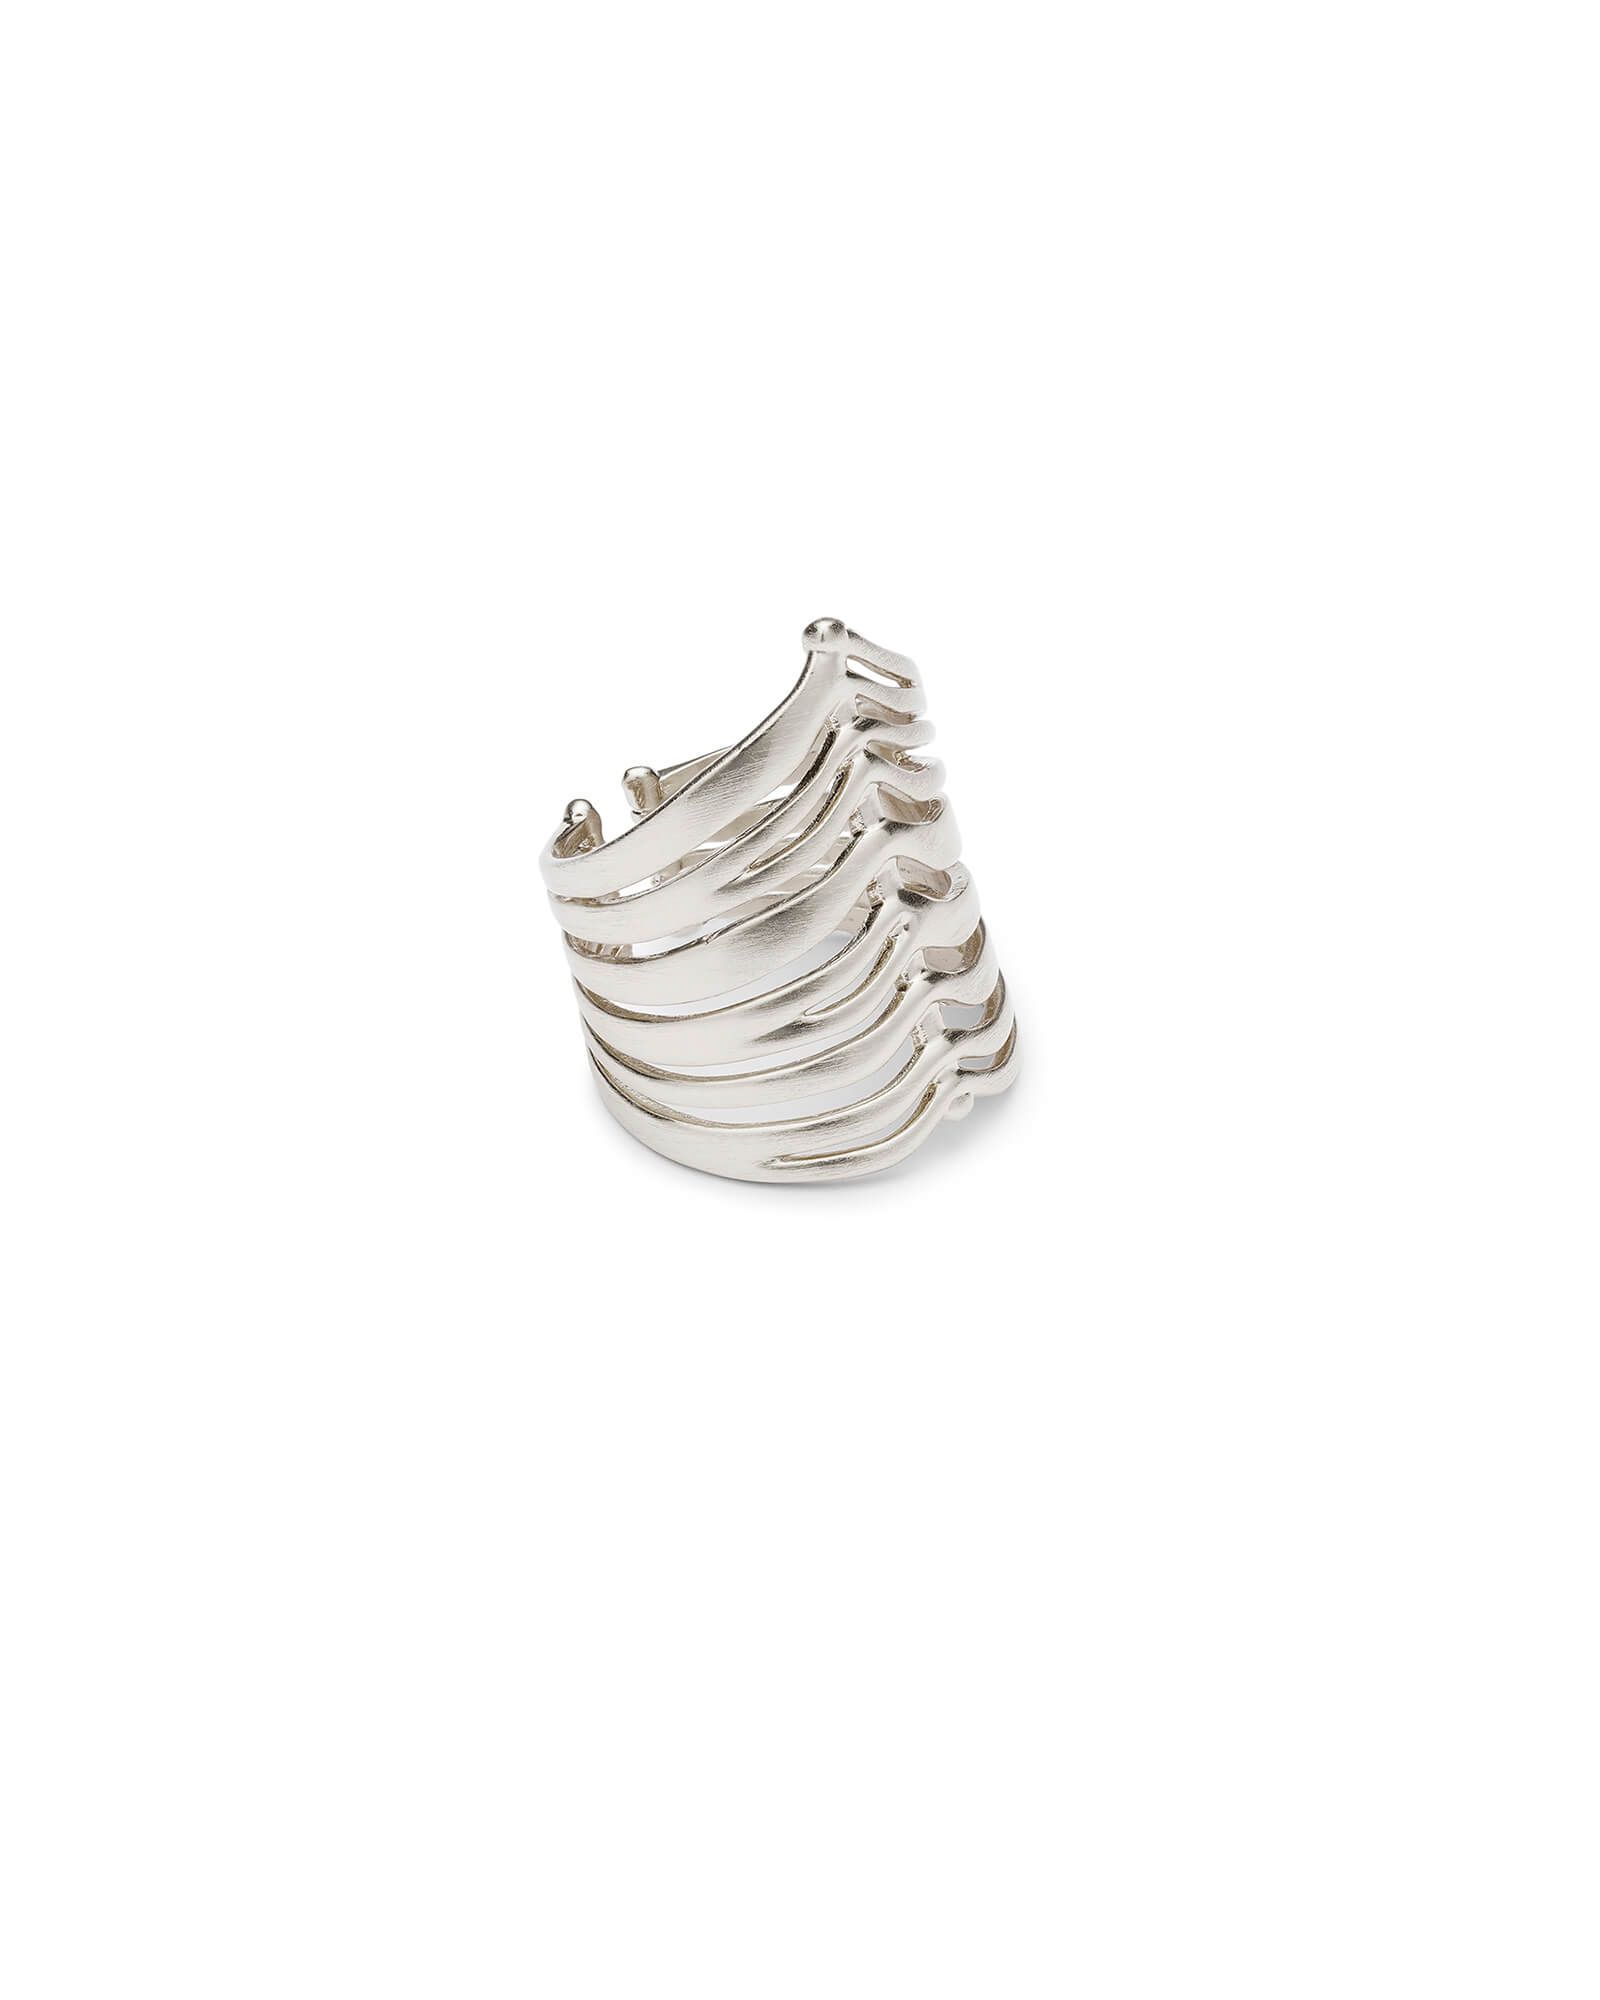 Liv Cocktail Ring in Silver | Kendra Scott